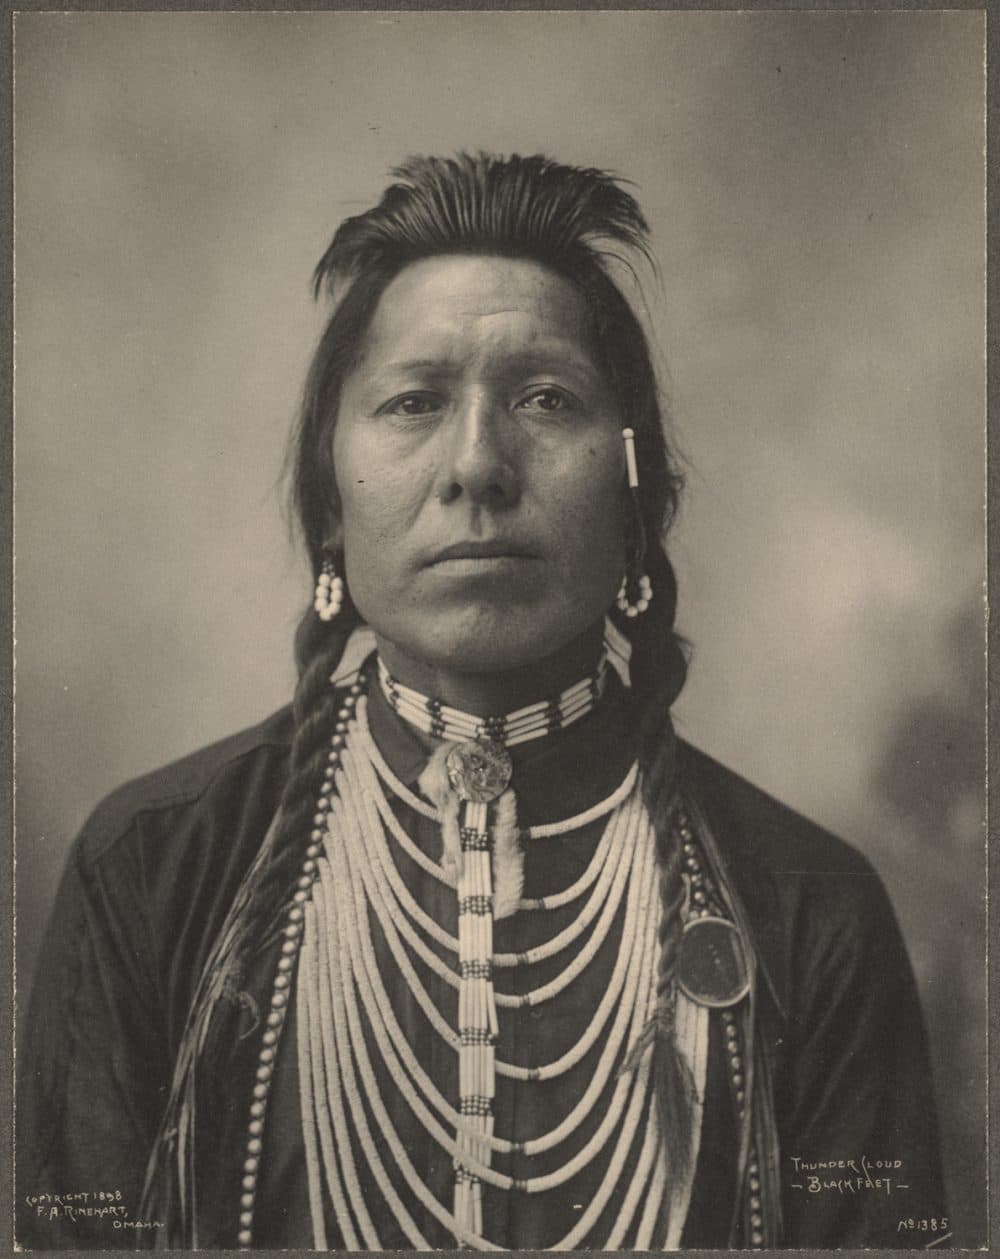 An archival photo from 1898 of Thunder Cloud, Blackfeet, an Algonquian Native American. (Boston Public Library/Flickr)